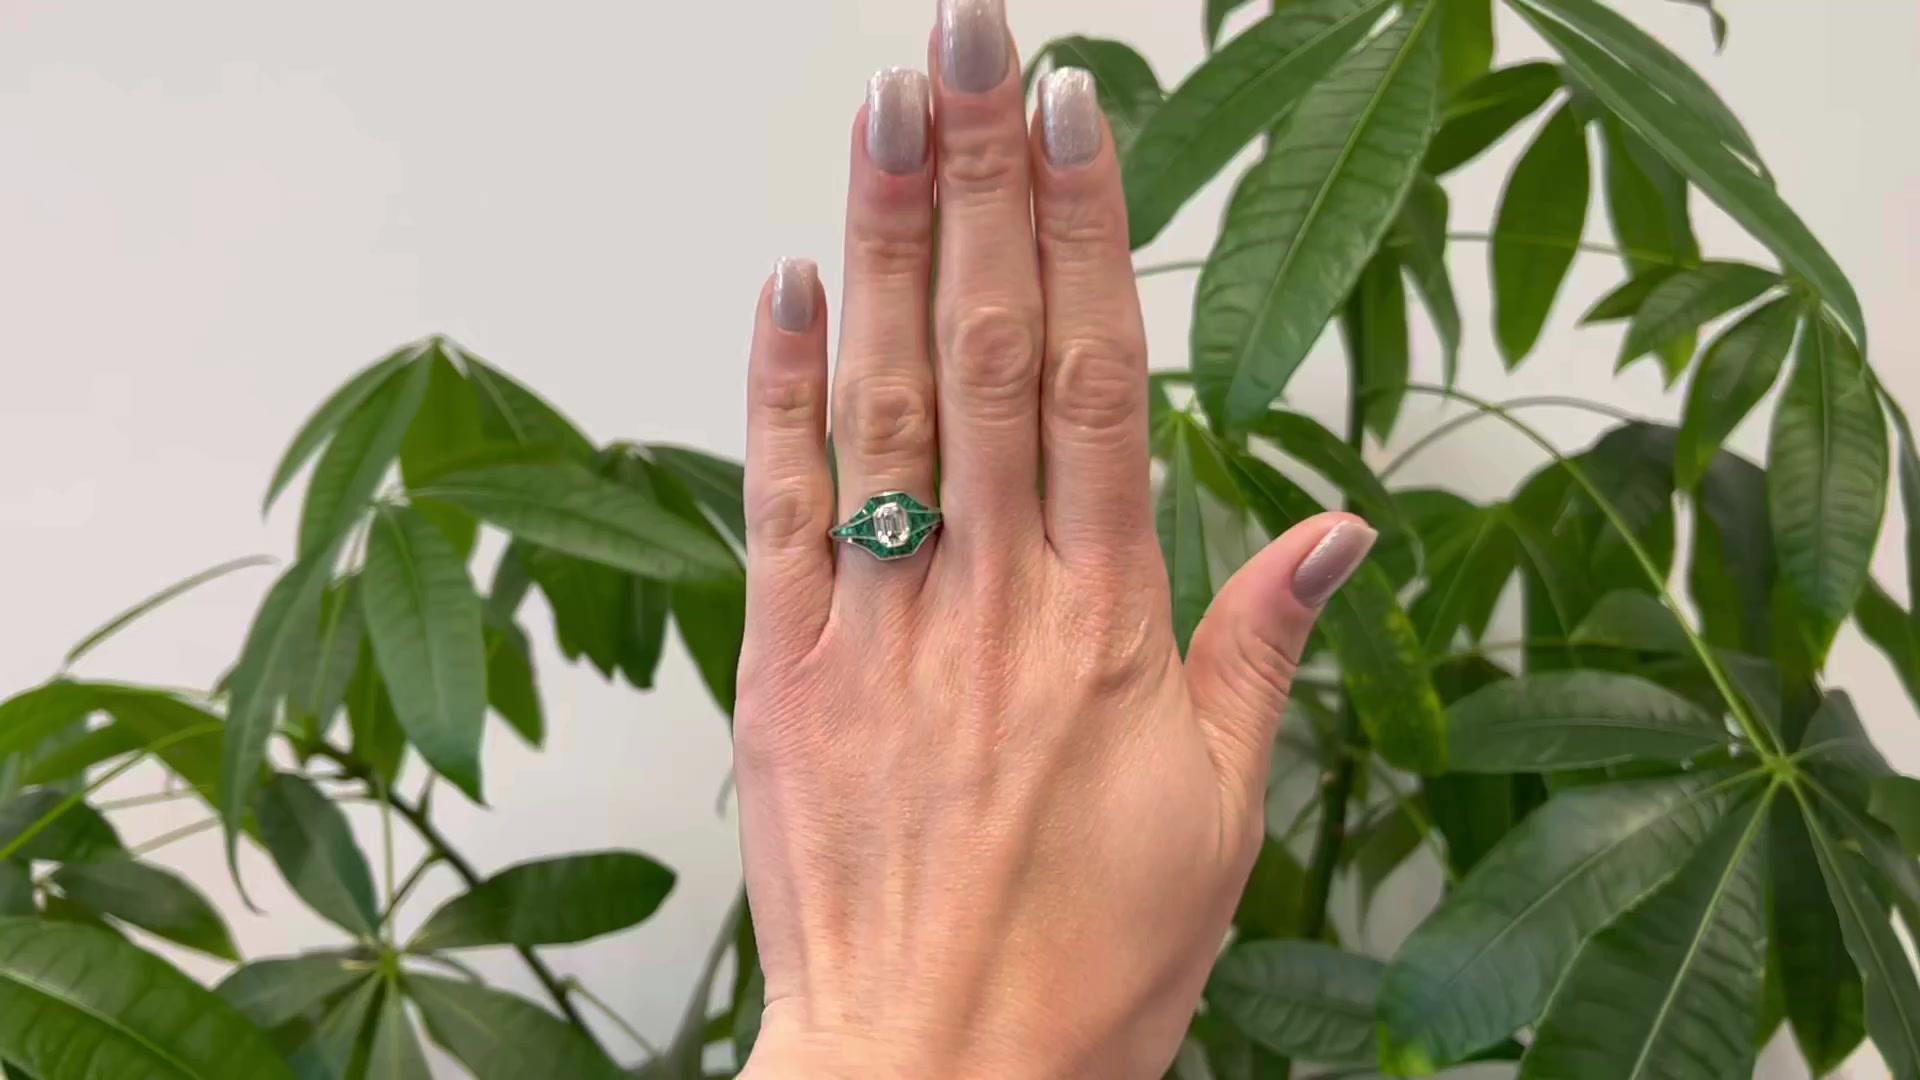 One Art Deco Inspired 1.04 Carat Emerald Cut Diamond and Emerald Platinum Ring. Featuring one emerald cut diamond weighing 1.04 carats, graded F color, VVS2 clarity. Crafted in 26 calibré cut emeralds with a total weight of approximately 0.80 carat.